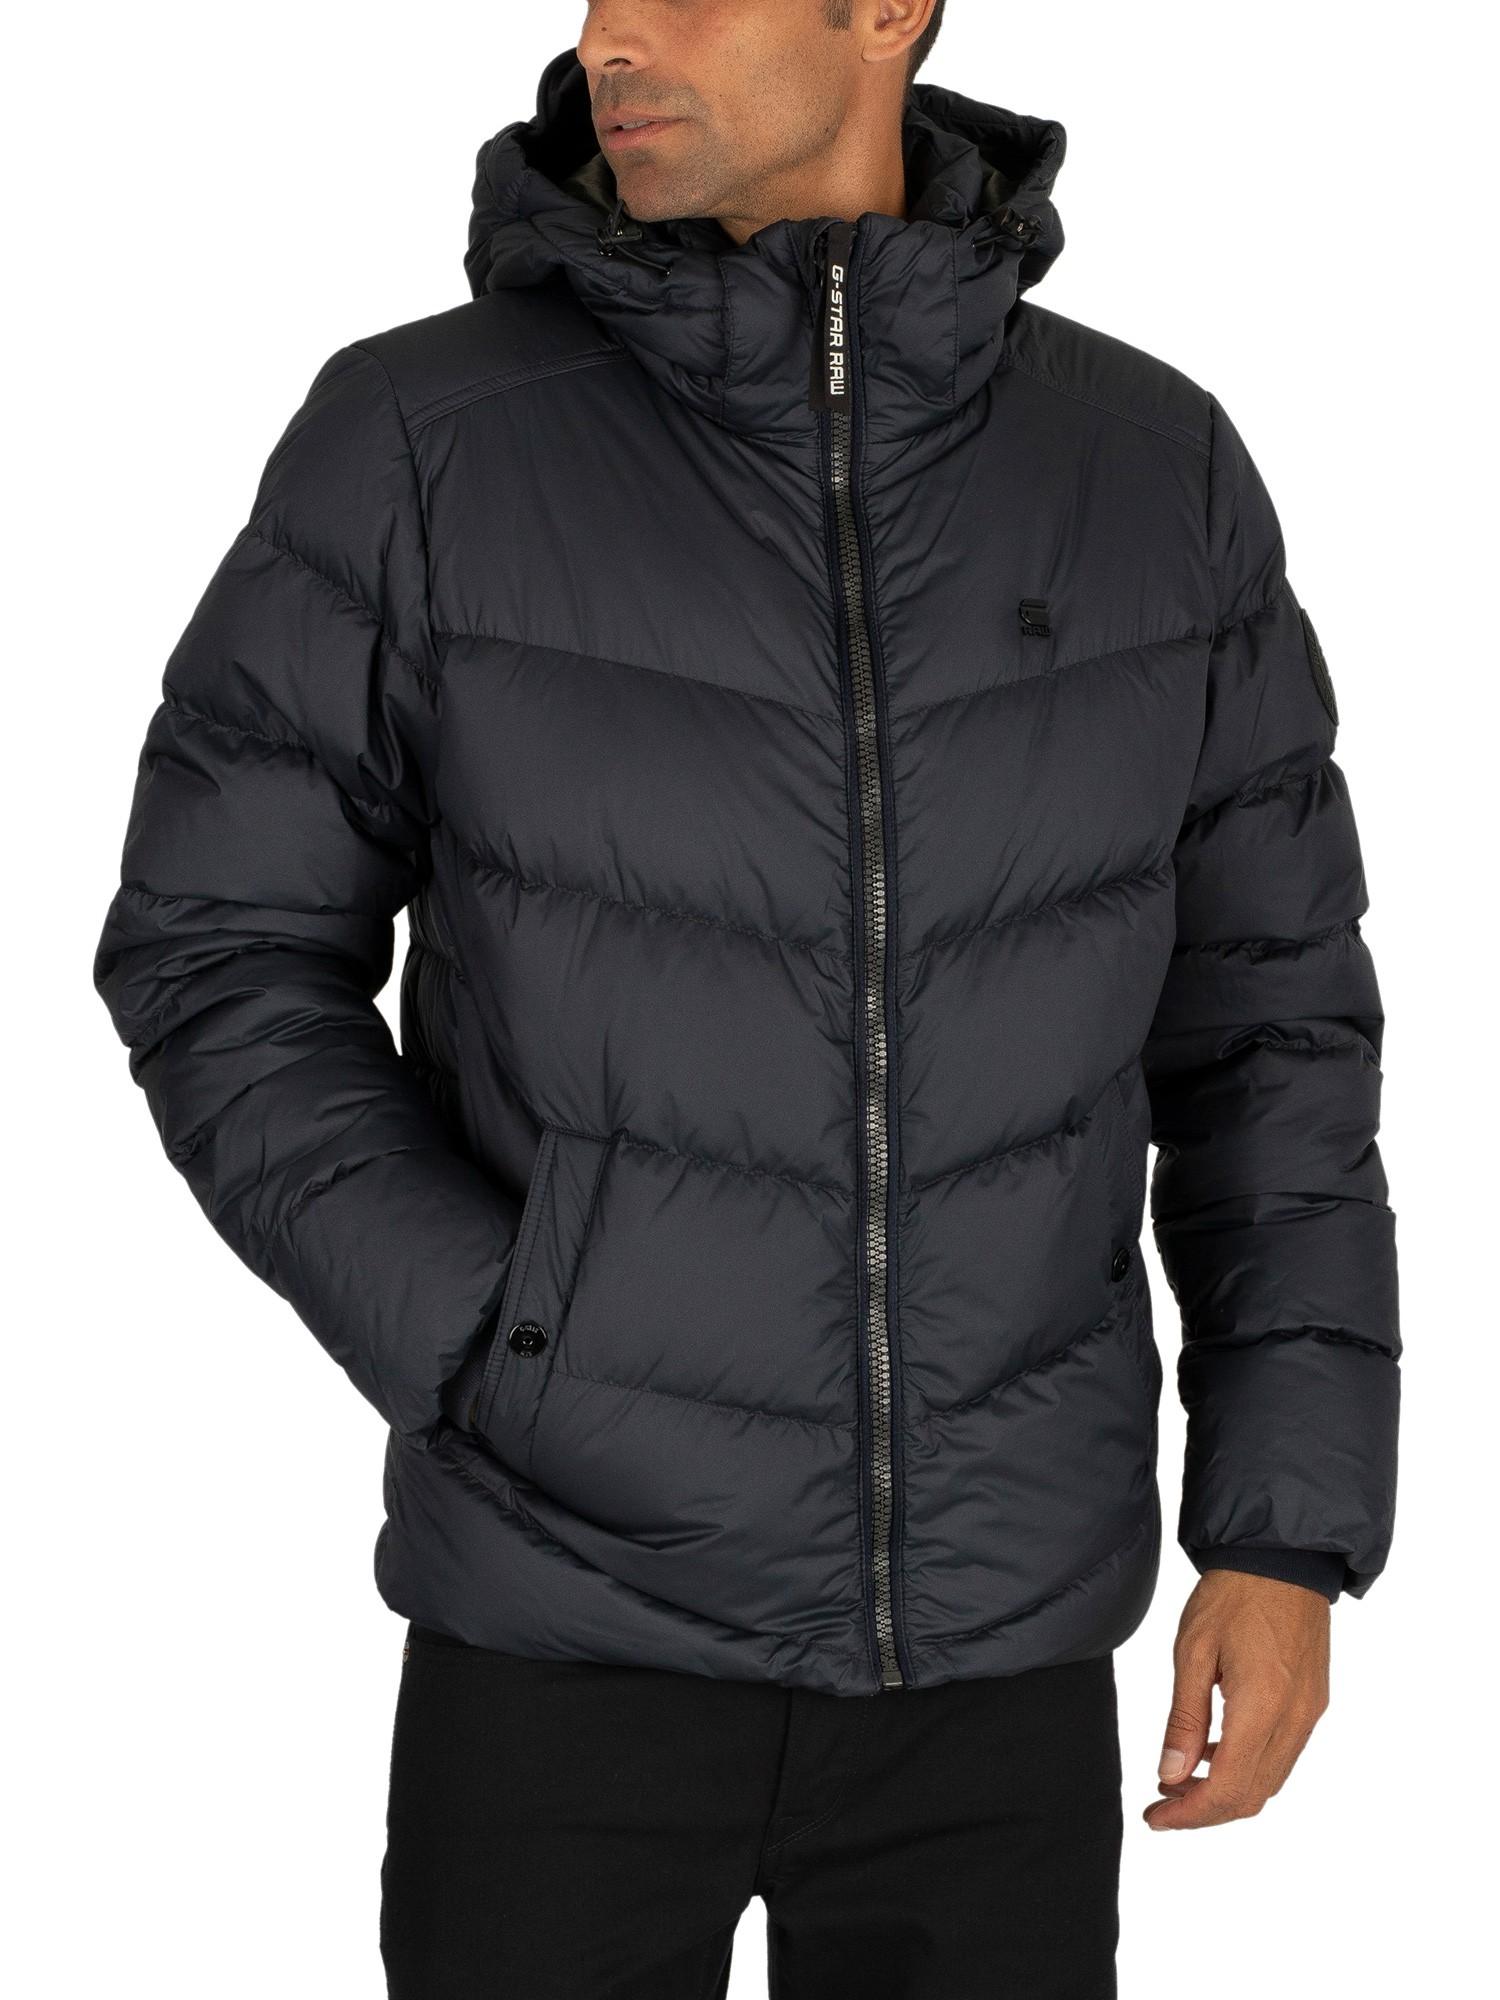 G-Star RAW Synthetic Whistler Down Puffer Jacket in Blue for Men - Lyst